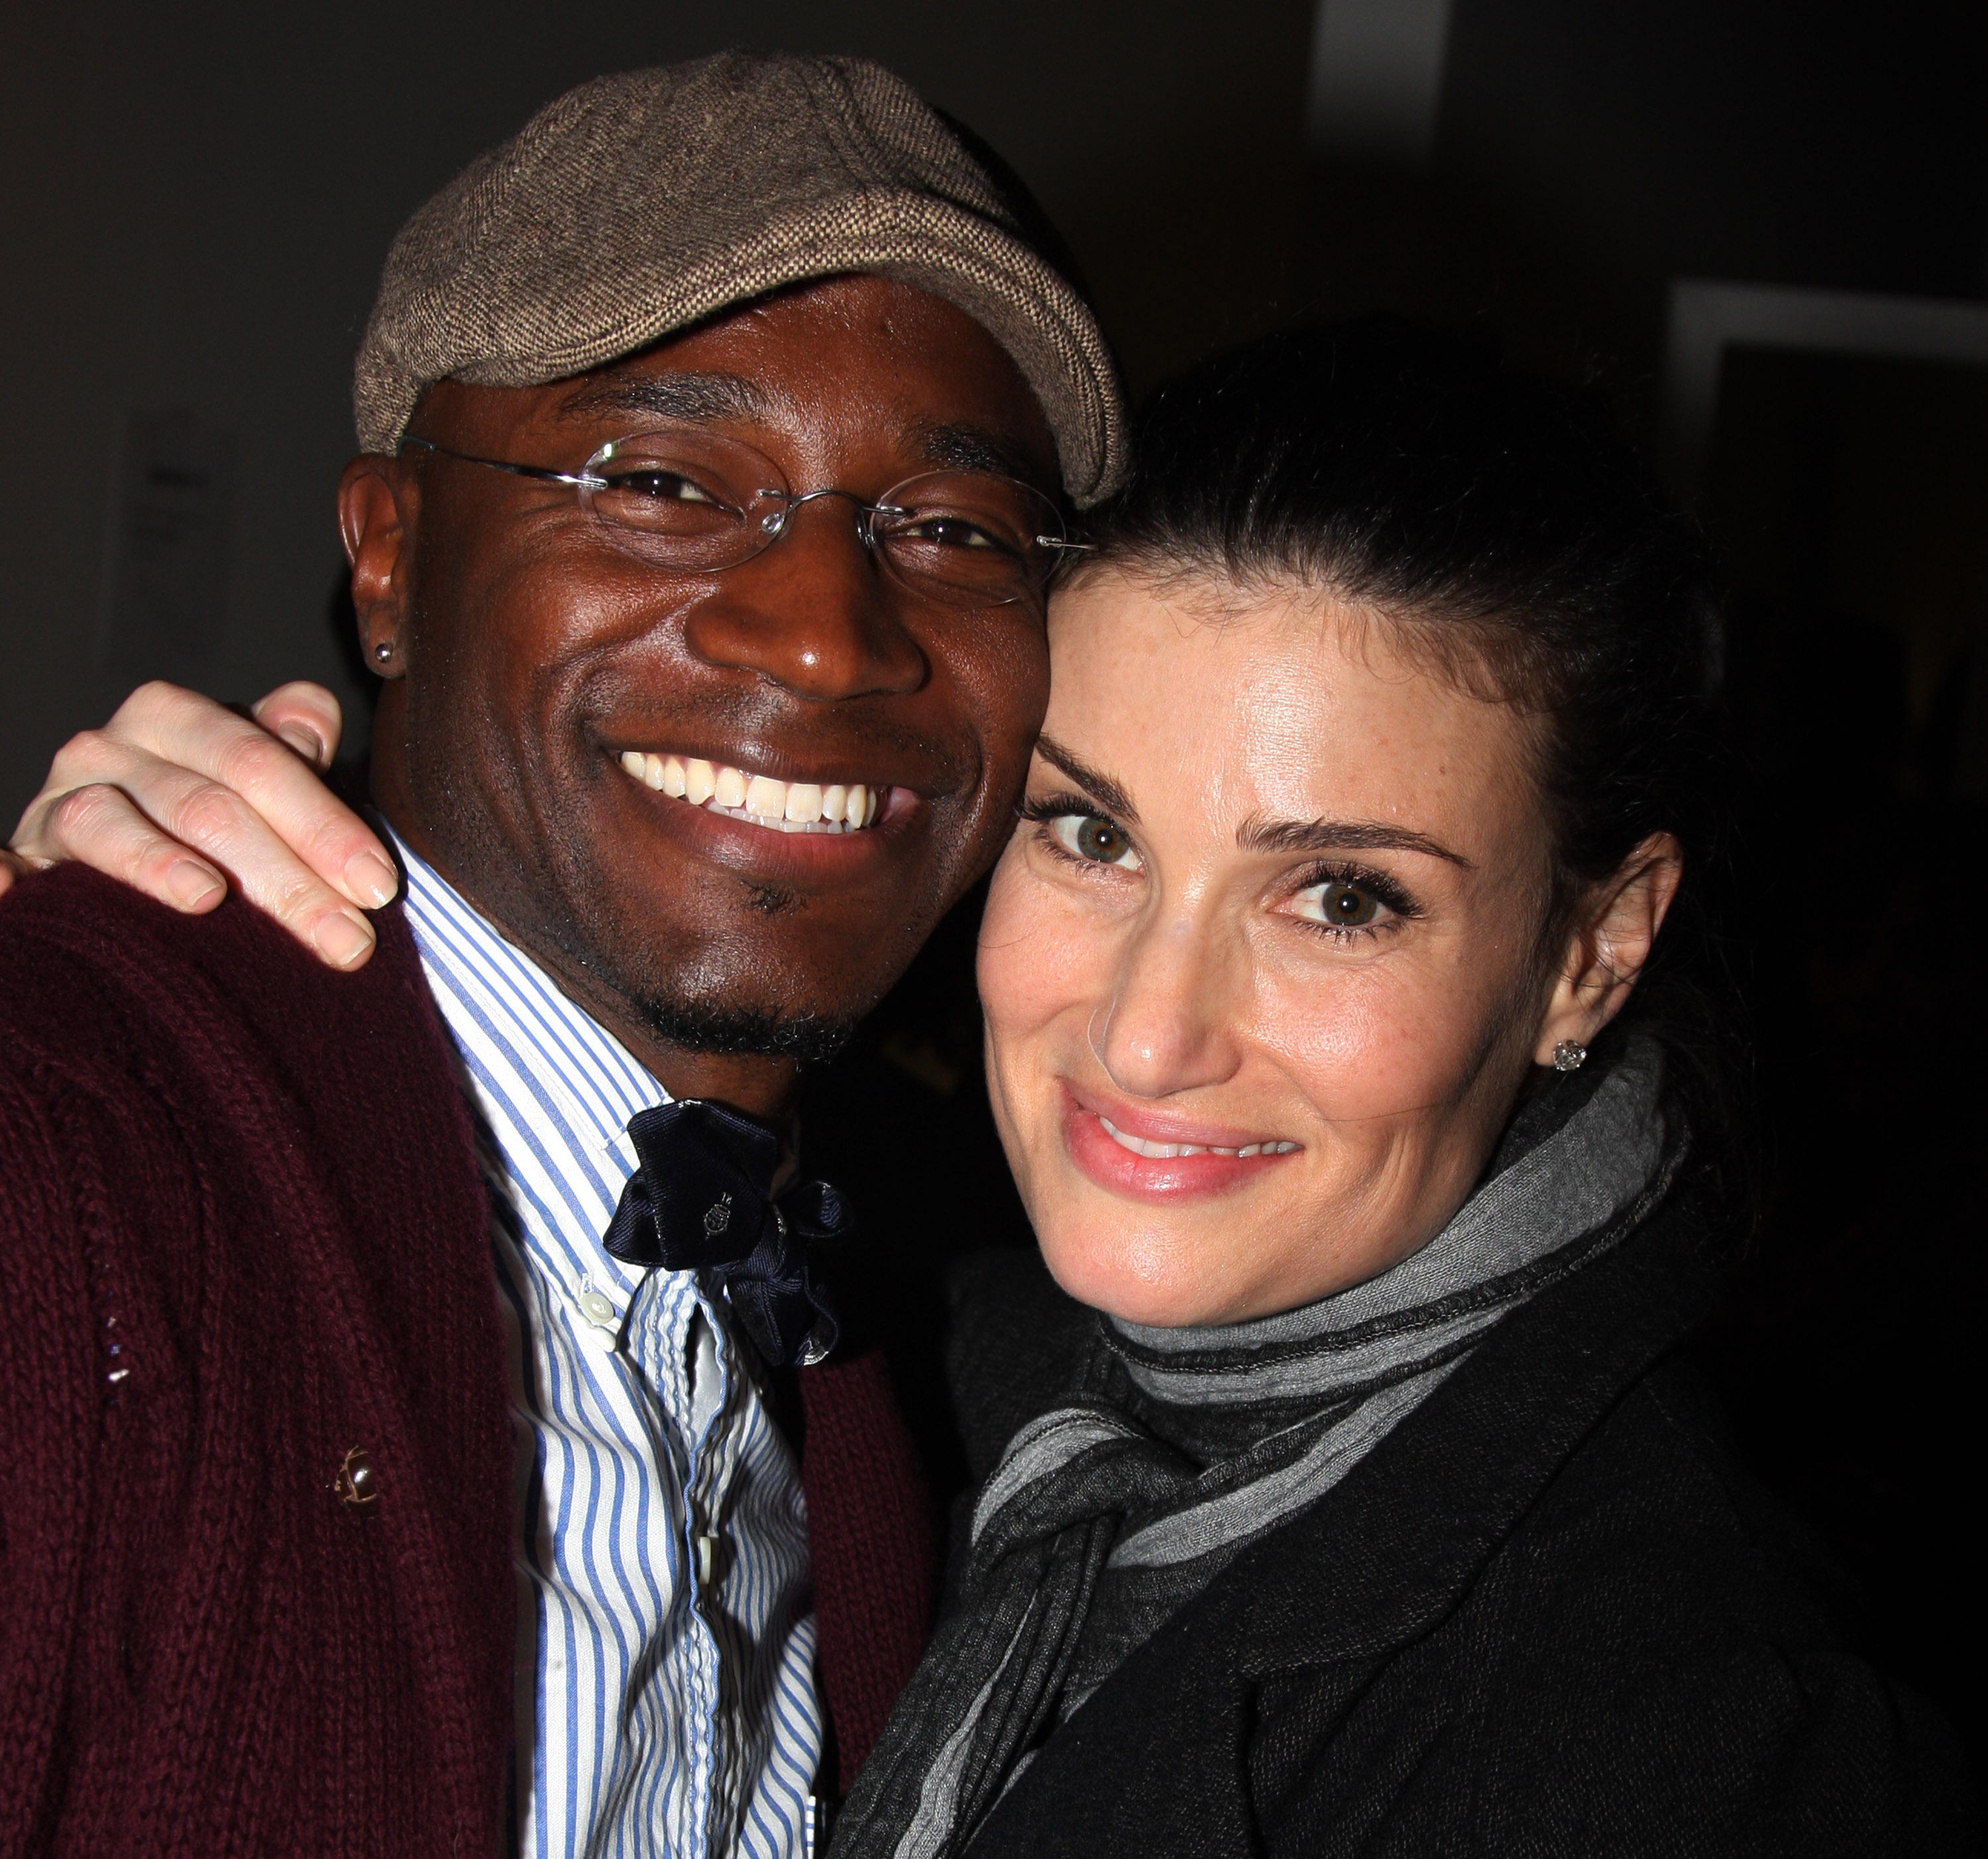 Taye Diggs and Idina Menzel pose during the opening night party for the world premiere of 'Minsky's' held at Ahmanson Theatre on February 6, 2009 in Los Angeles, California.